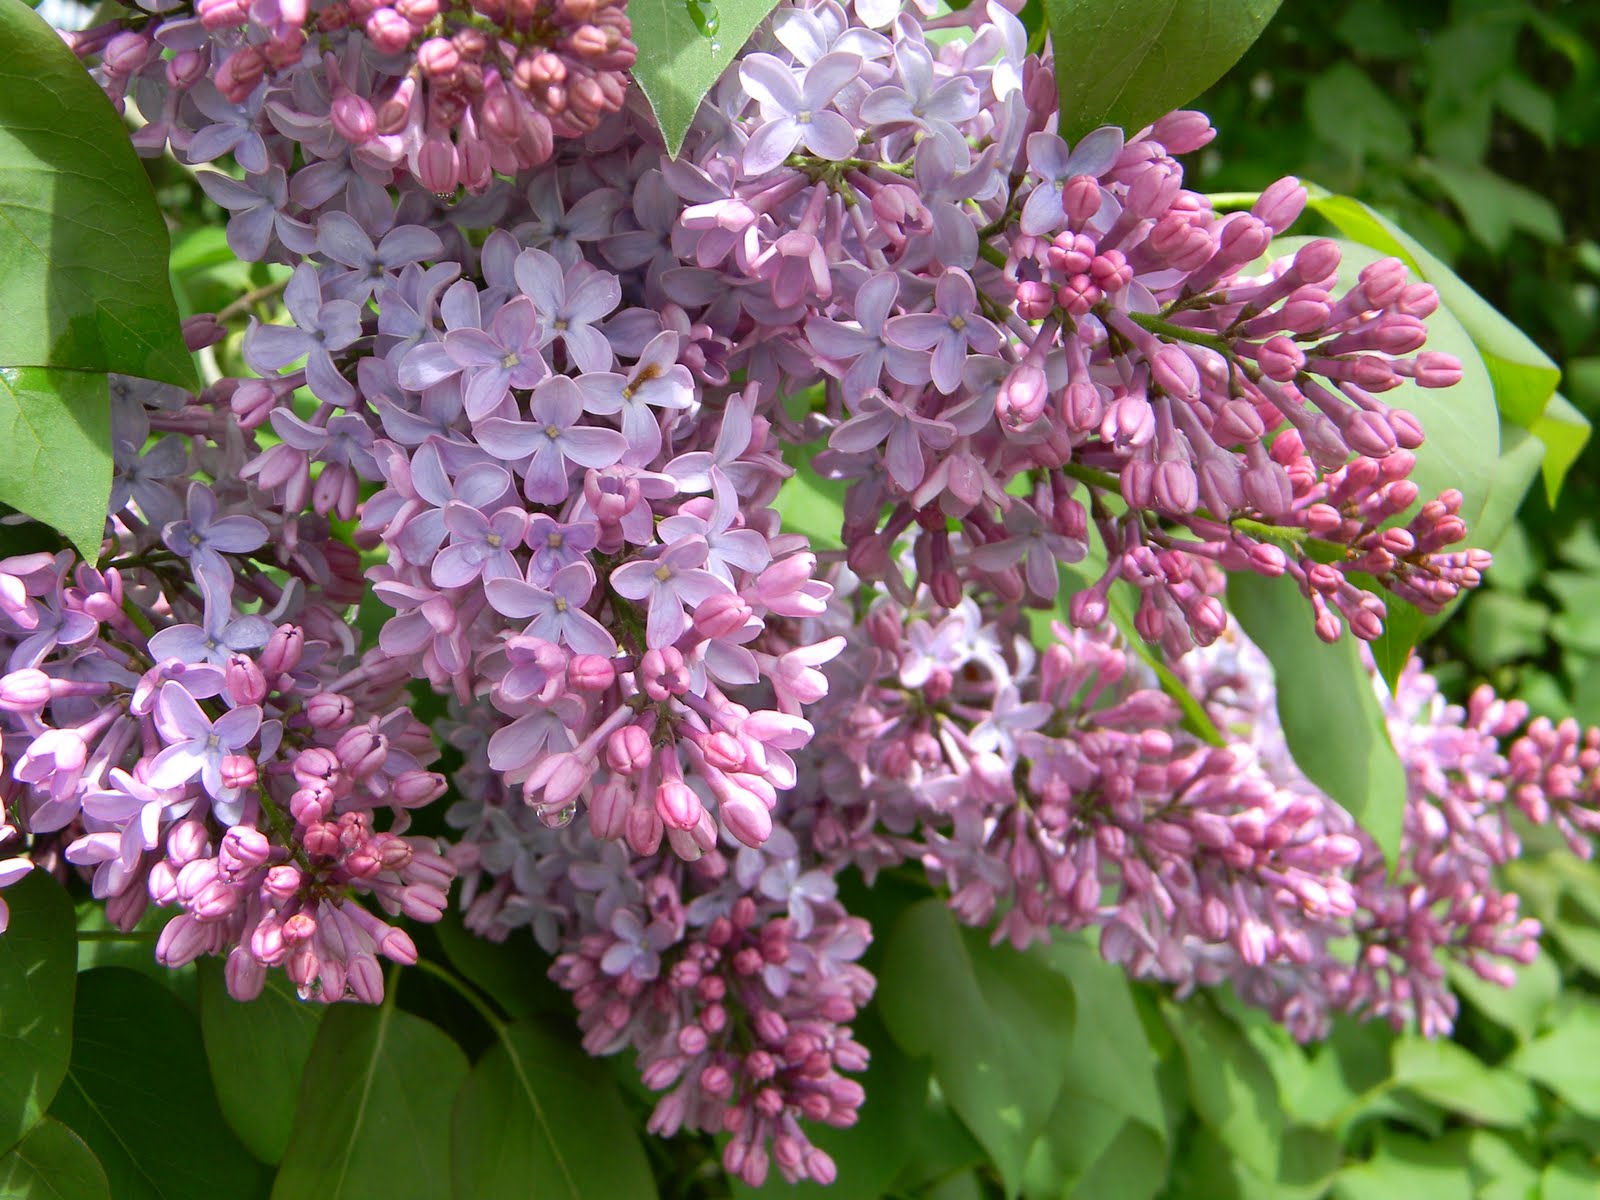 Lilacs and apple blossoms in the backyard.